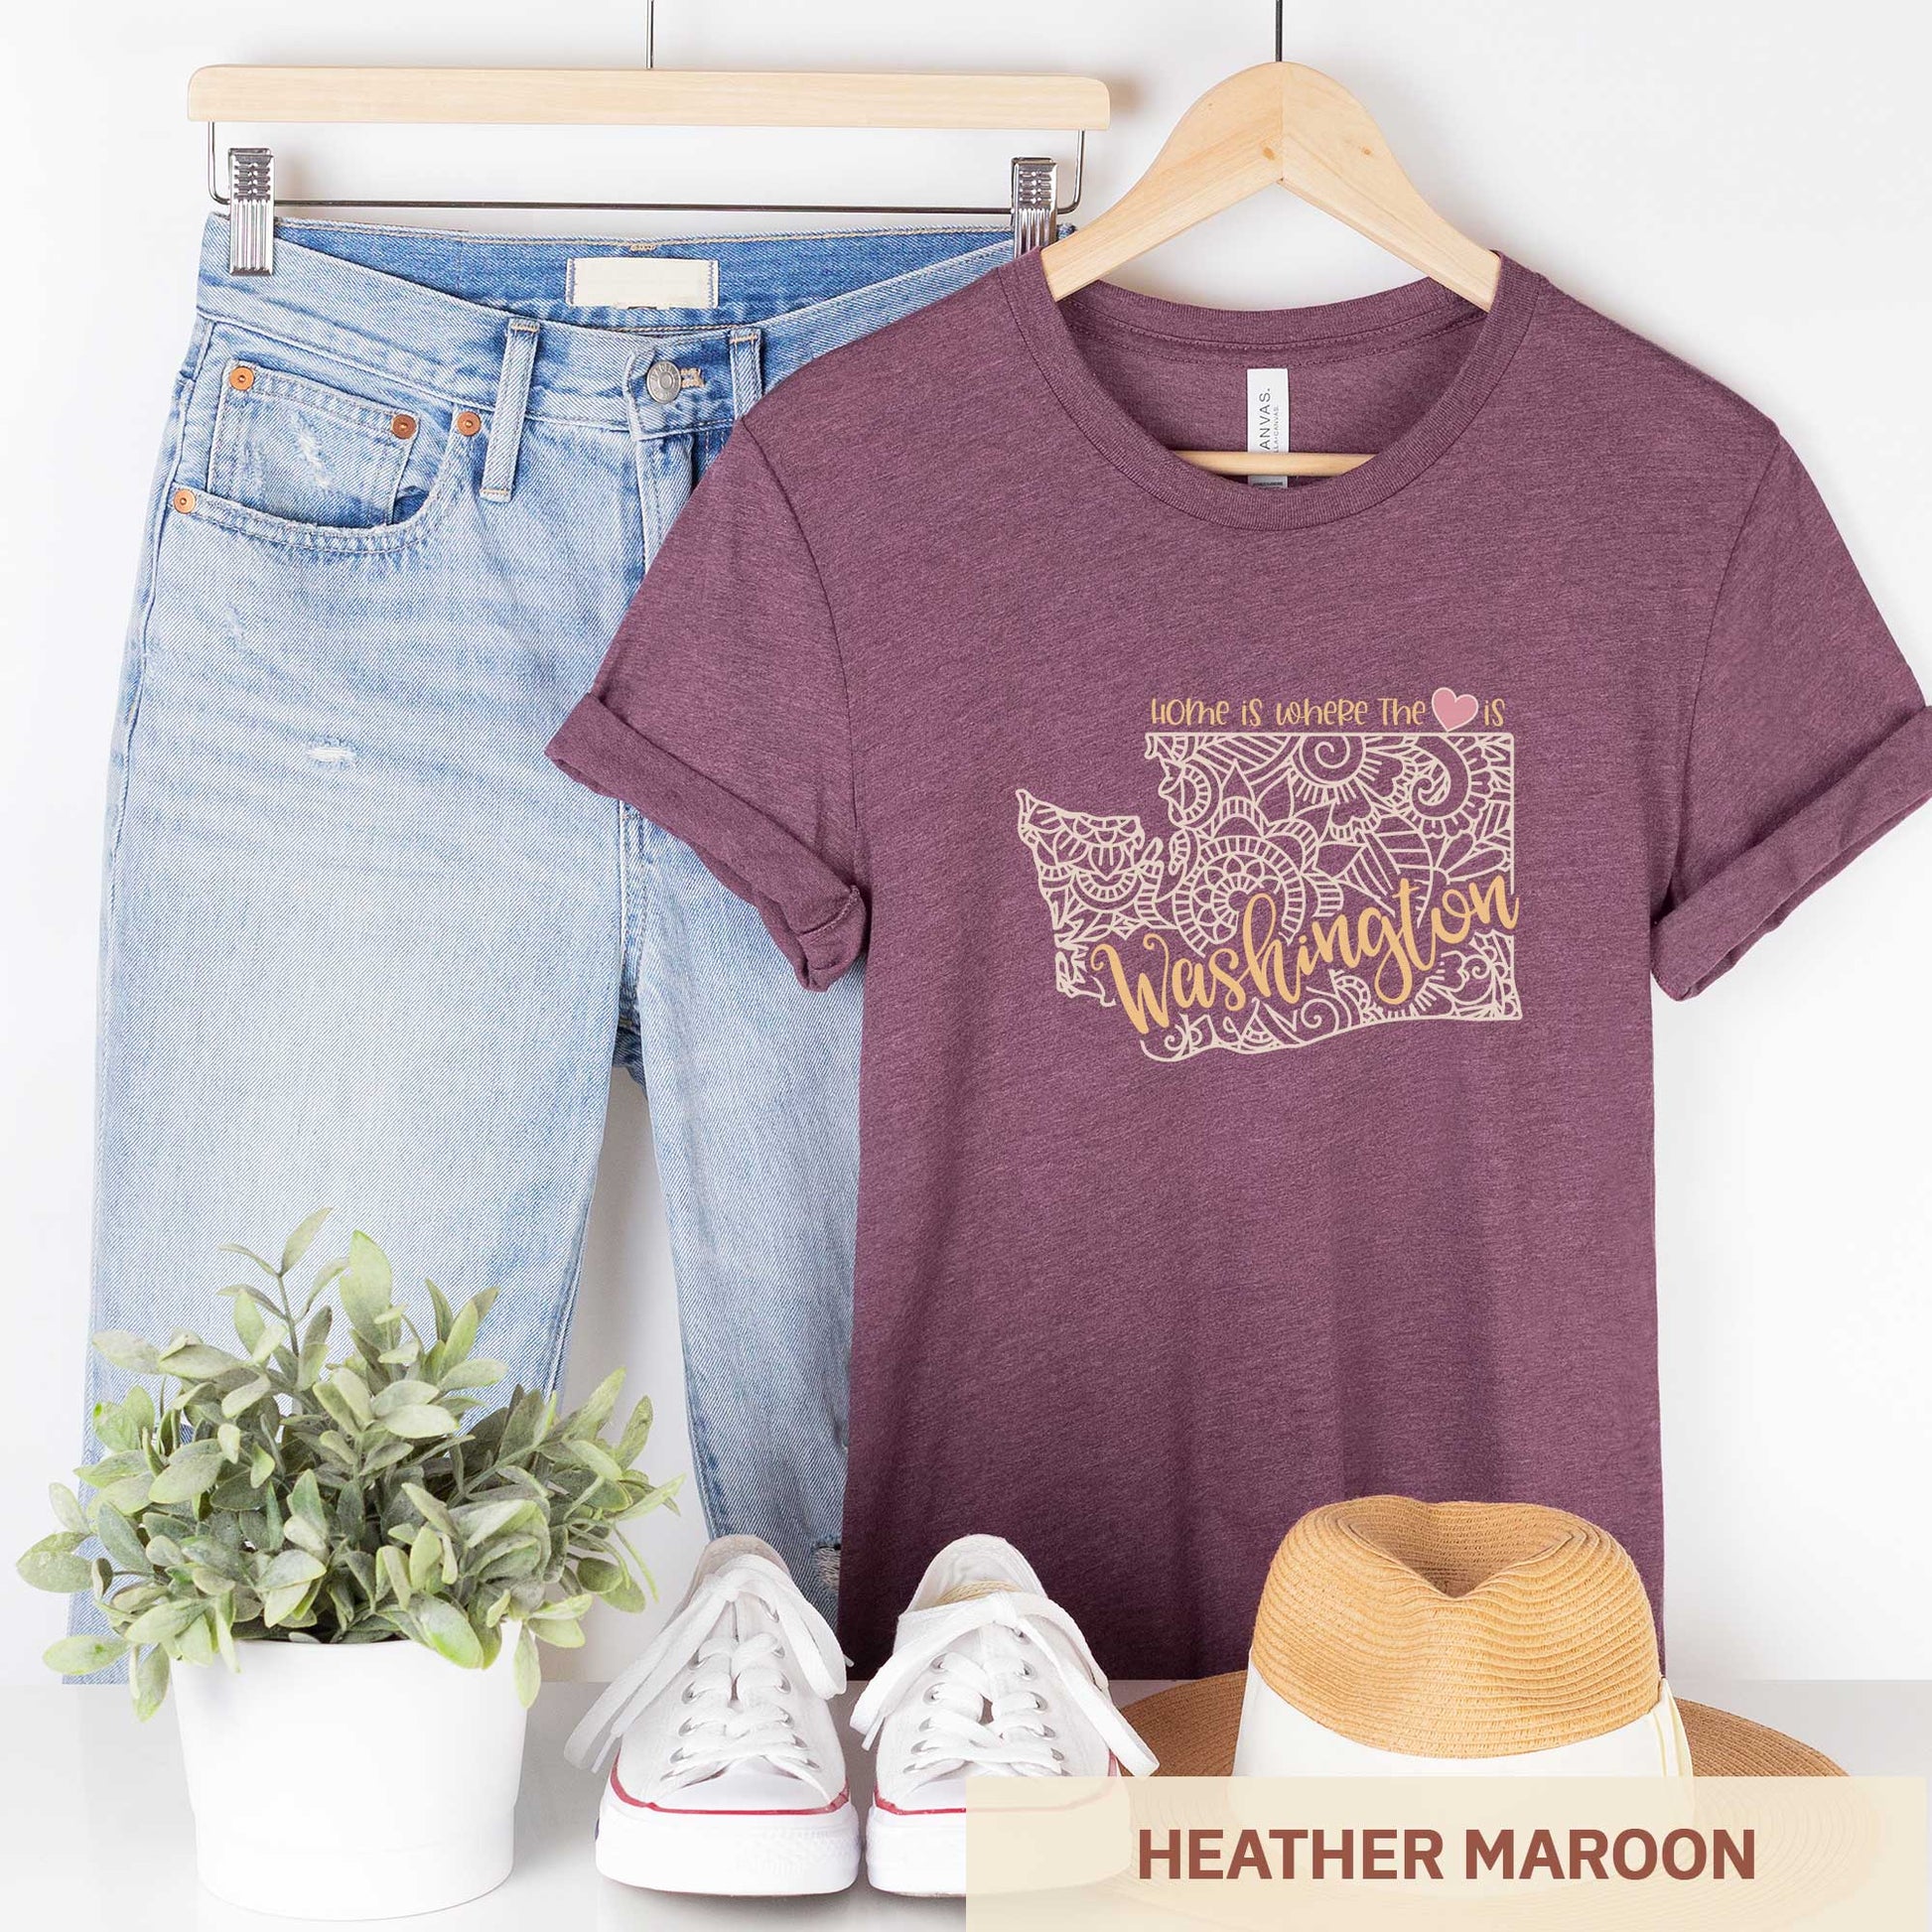 A hanging heather maroon Bella Canvas t-shirt featuring a mandala in the shape of Washington with the words home is where the heart is.